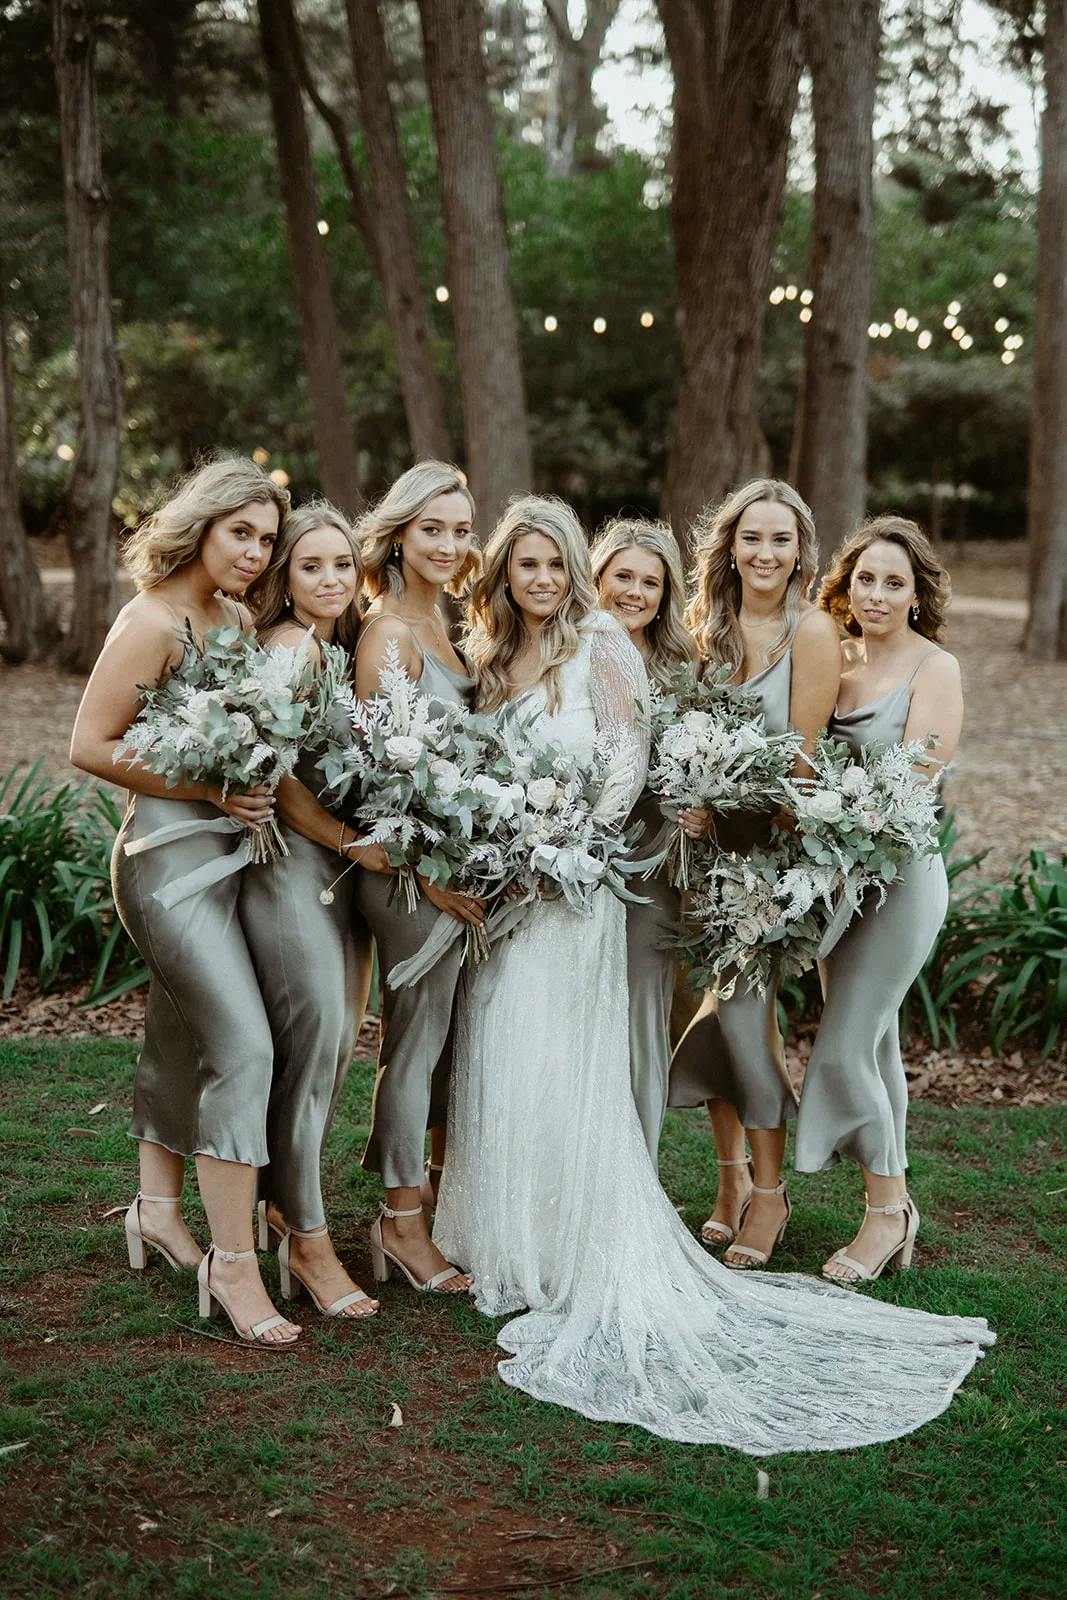 A bride in a white lace gown stands with five bridesmaids wearing silver dresses. They are in an outdoor setting with trees and string lights in the background. Each holds a bouquet of flowers, and they are all smiling at the camera.